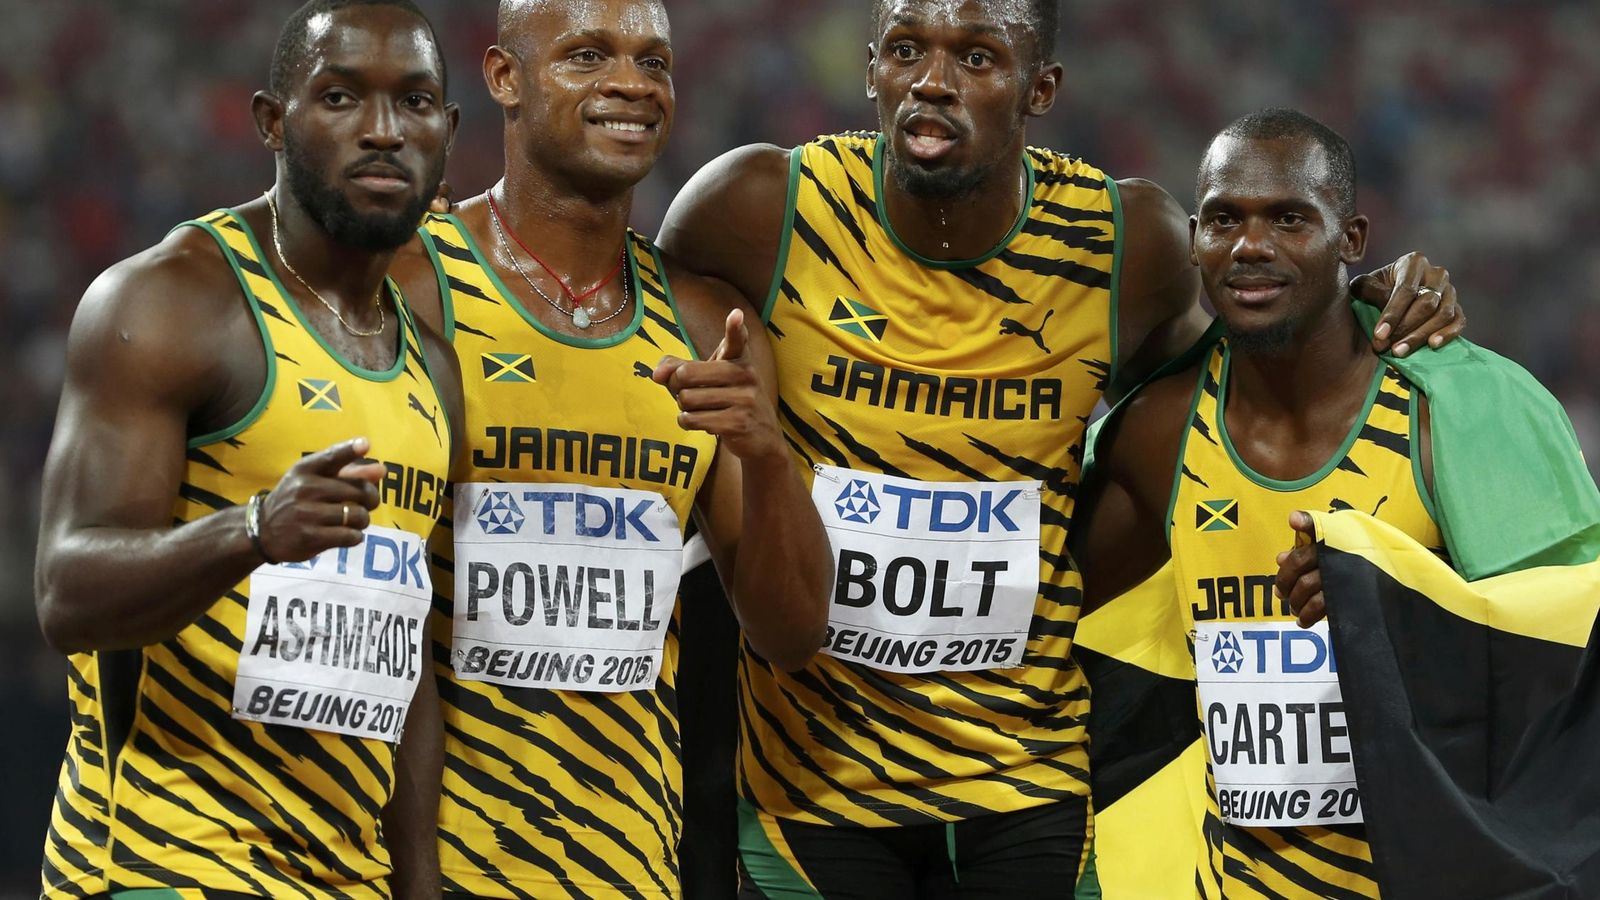 Foto: Ashmeade, Powell, Bolt and Carter of Jamaica react after winning the men's 4x100m relay during the 15th IAAF World Championships at the National Stadium in Beijing